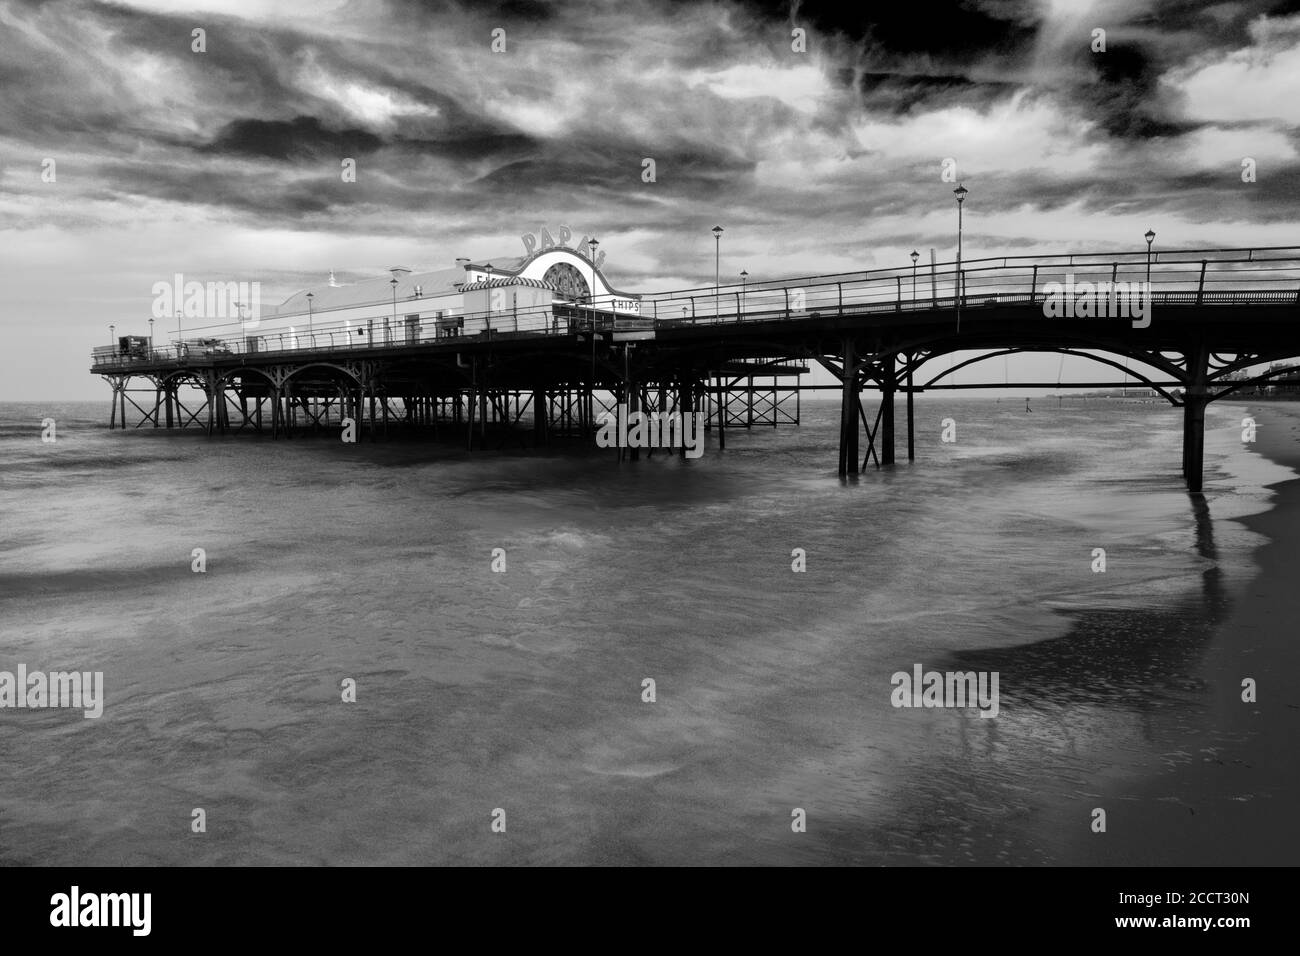 Cleethorpes Pier, Cleethorpes Town, North East Lincolnshire; Inghilterra; Regno Unito Foto Stock